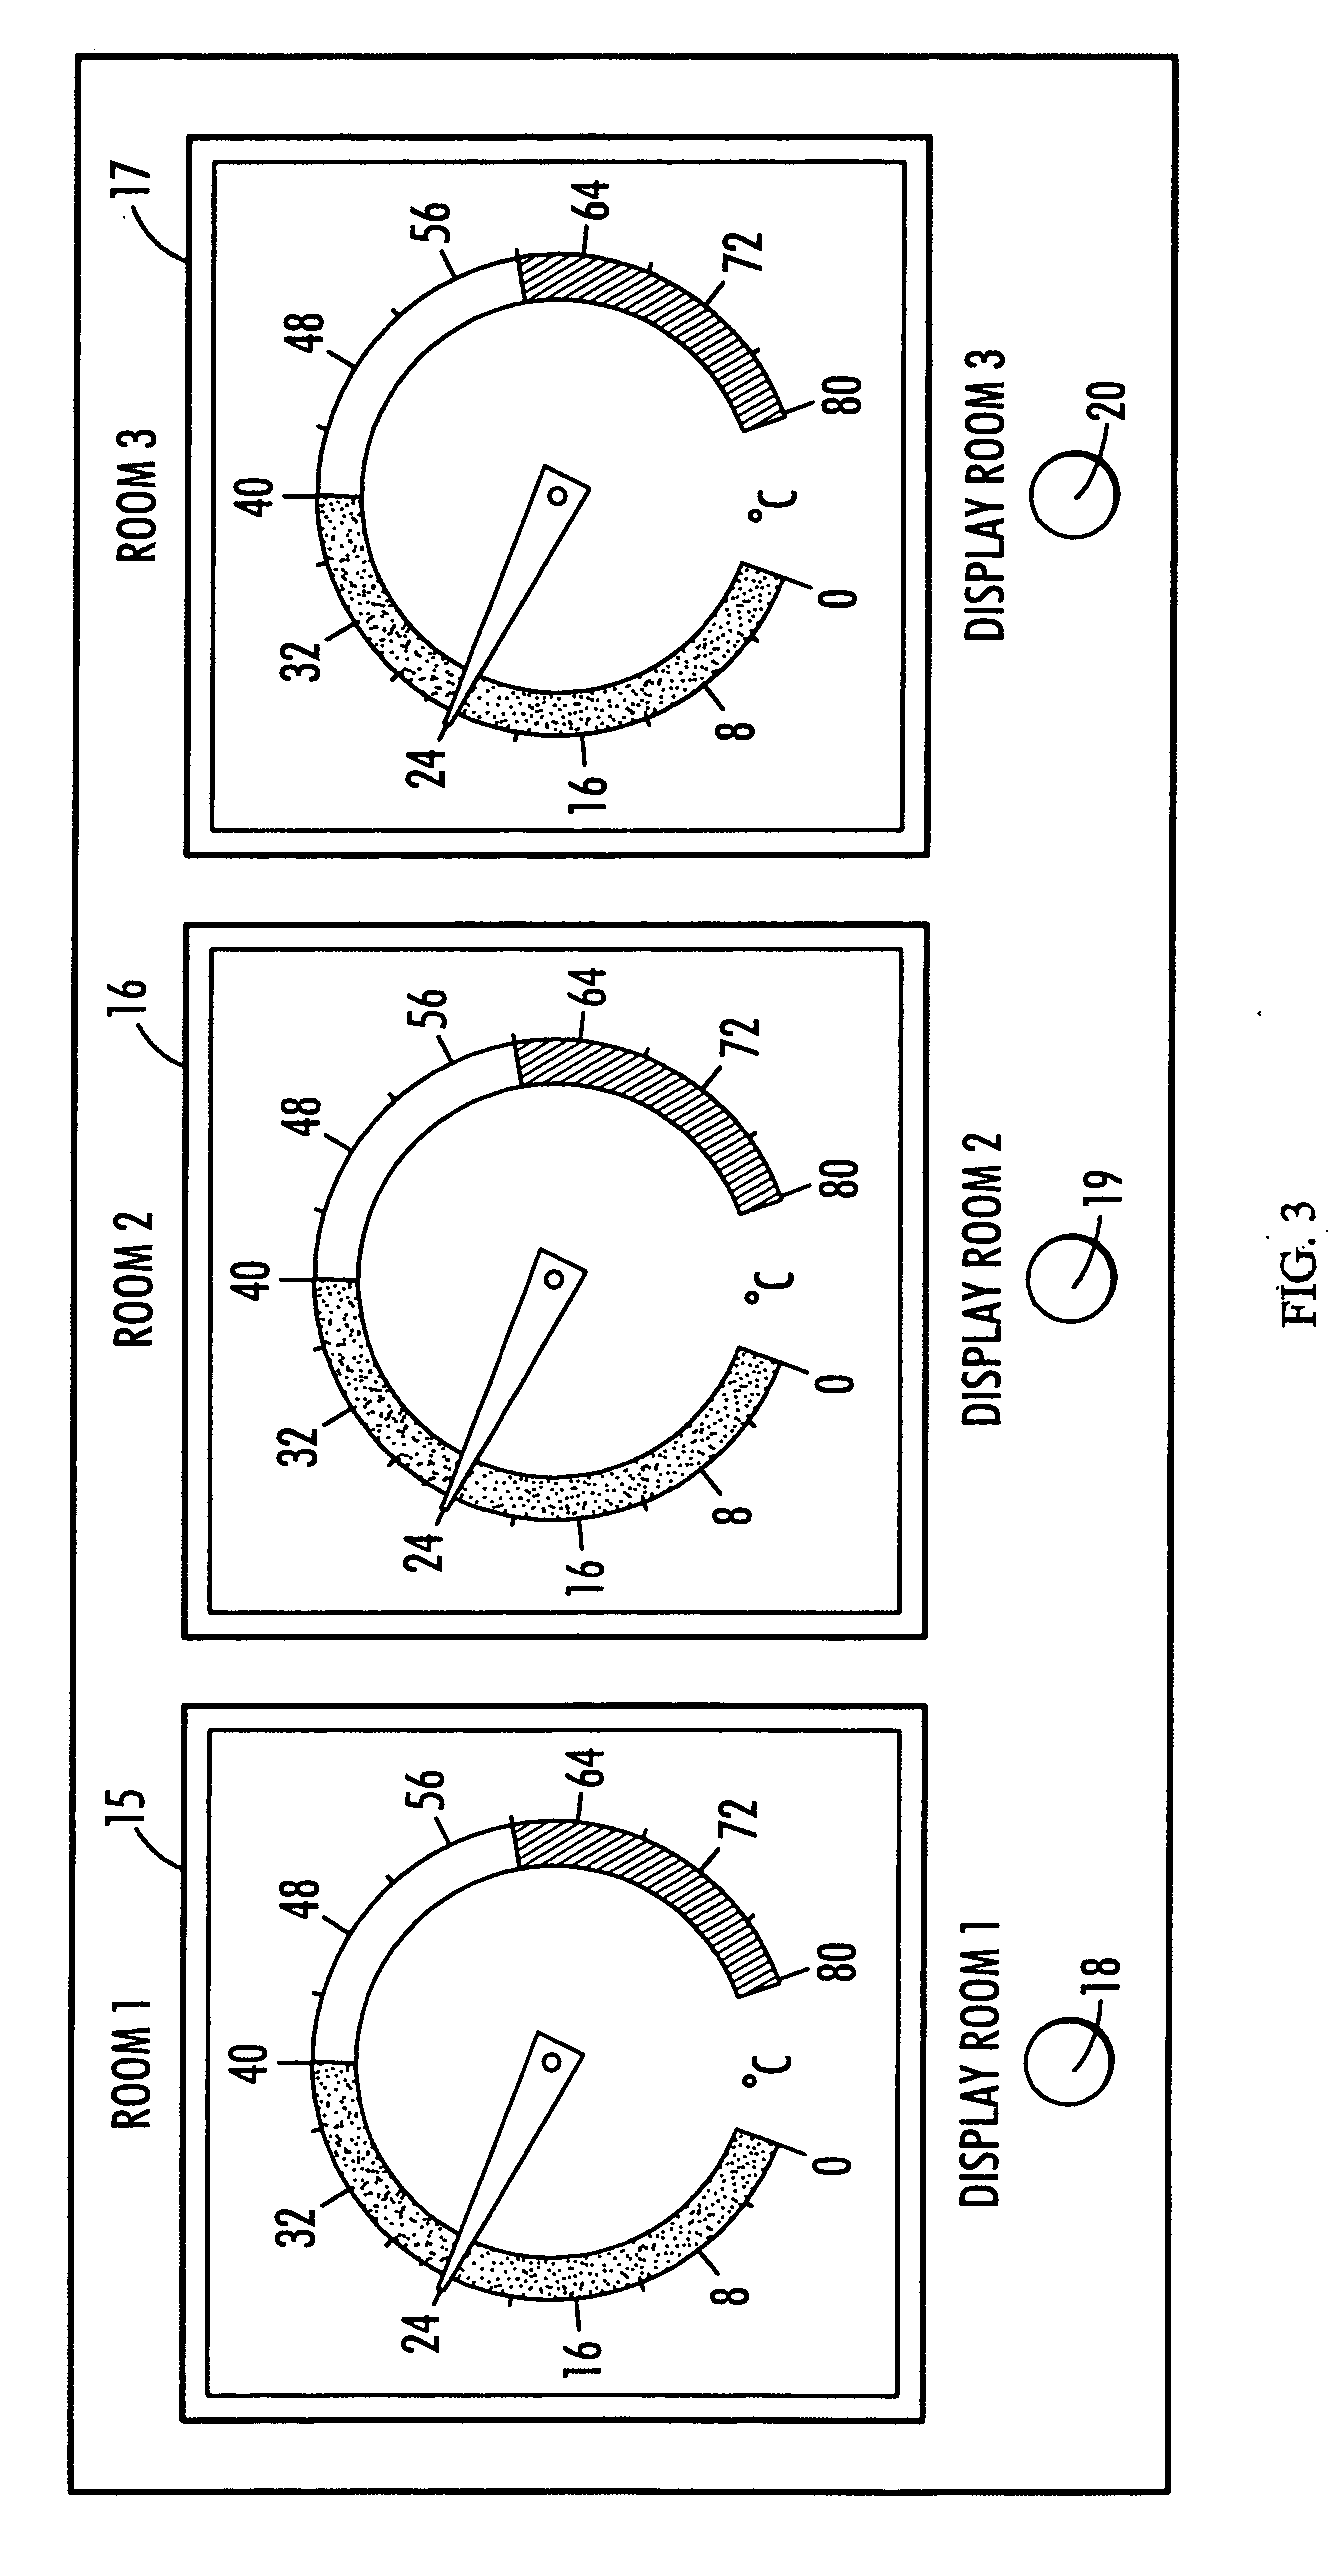 System for controlling and operating technical processes